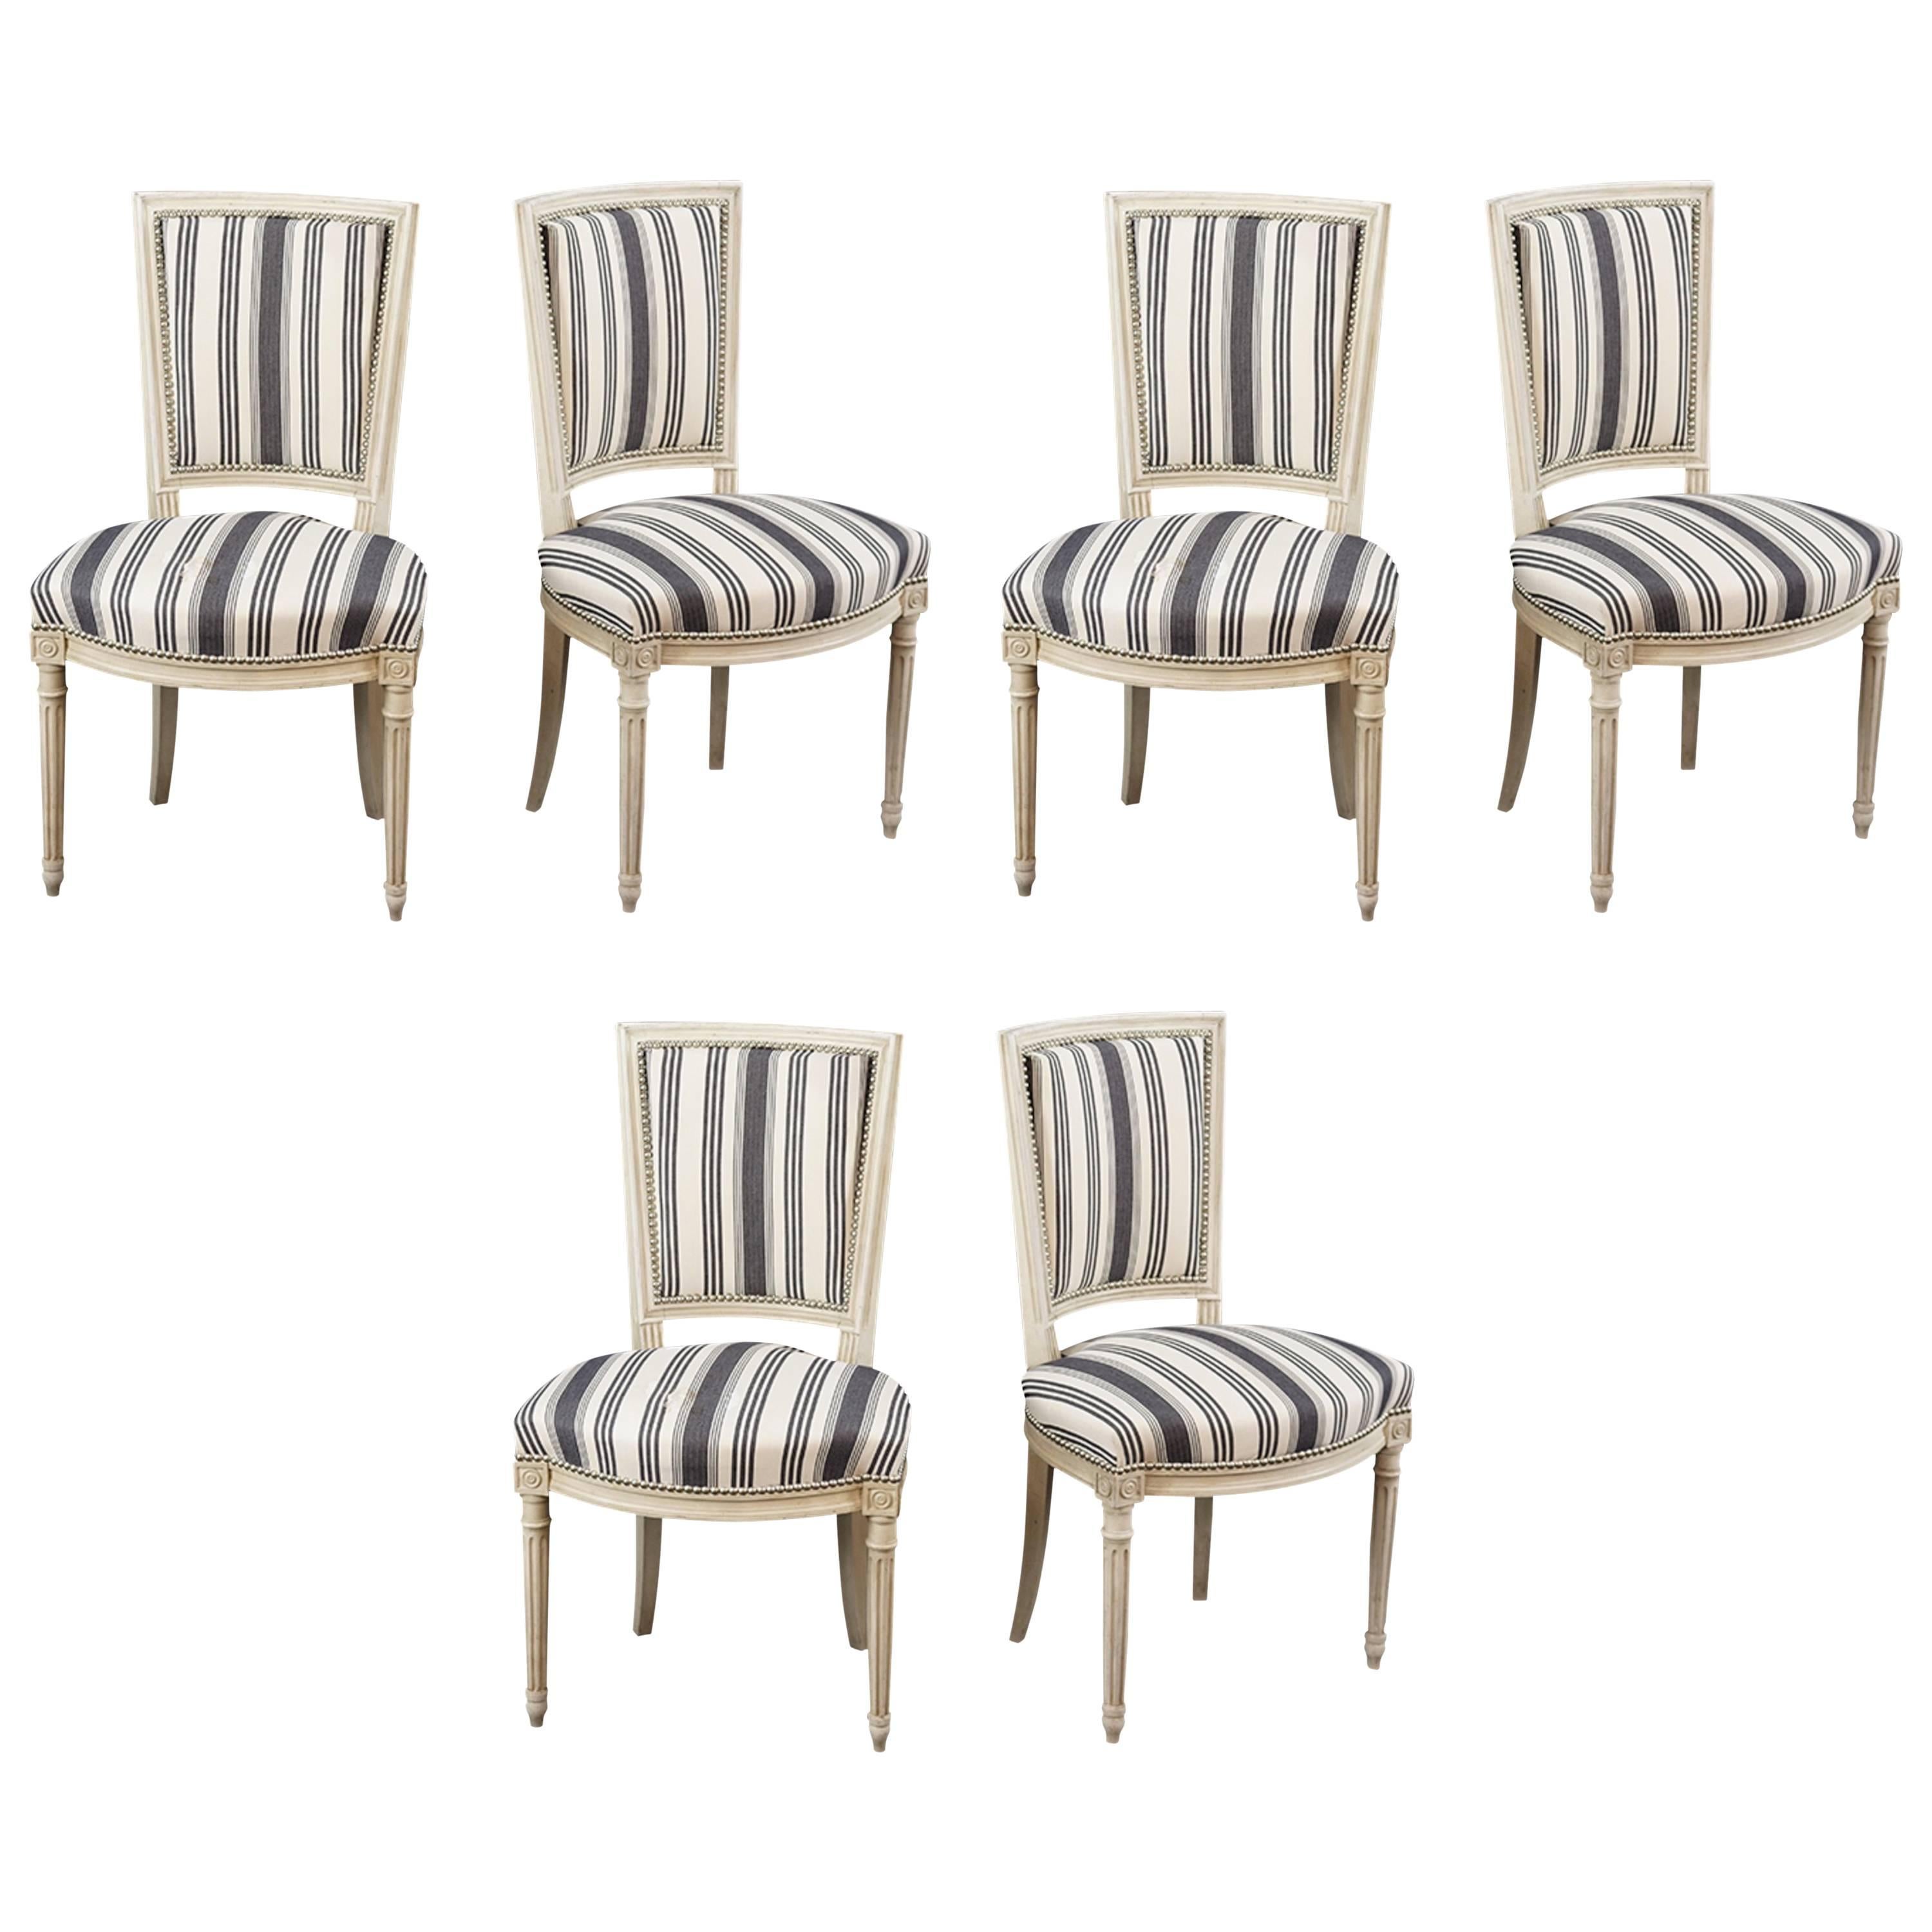 Handsome Set of Six Louis XVI Style Side Chairs Covered in Blue and White Stripe